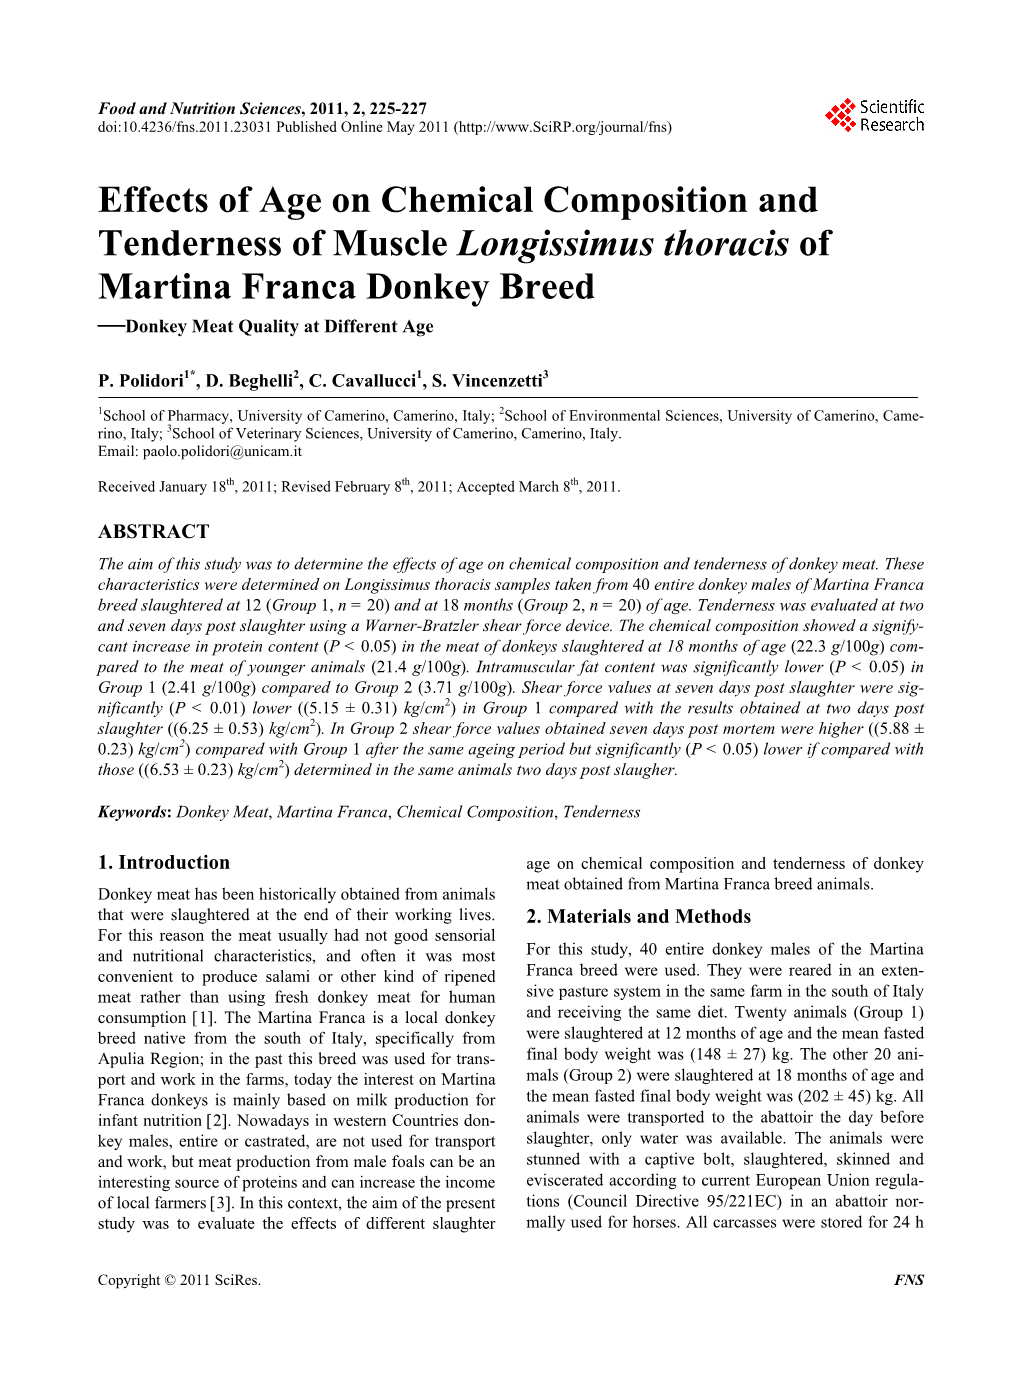 Effects of Age on Chemical Composition and Tenderness of Muscle Longissimus Thoracis of Martina Franca Donkey Breed —Donkey Meat Quality at Different Age